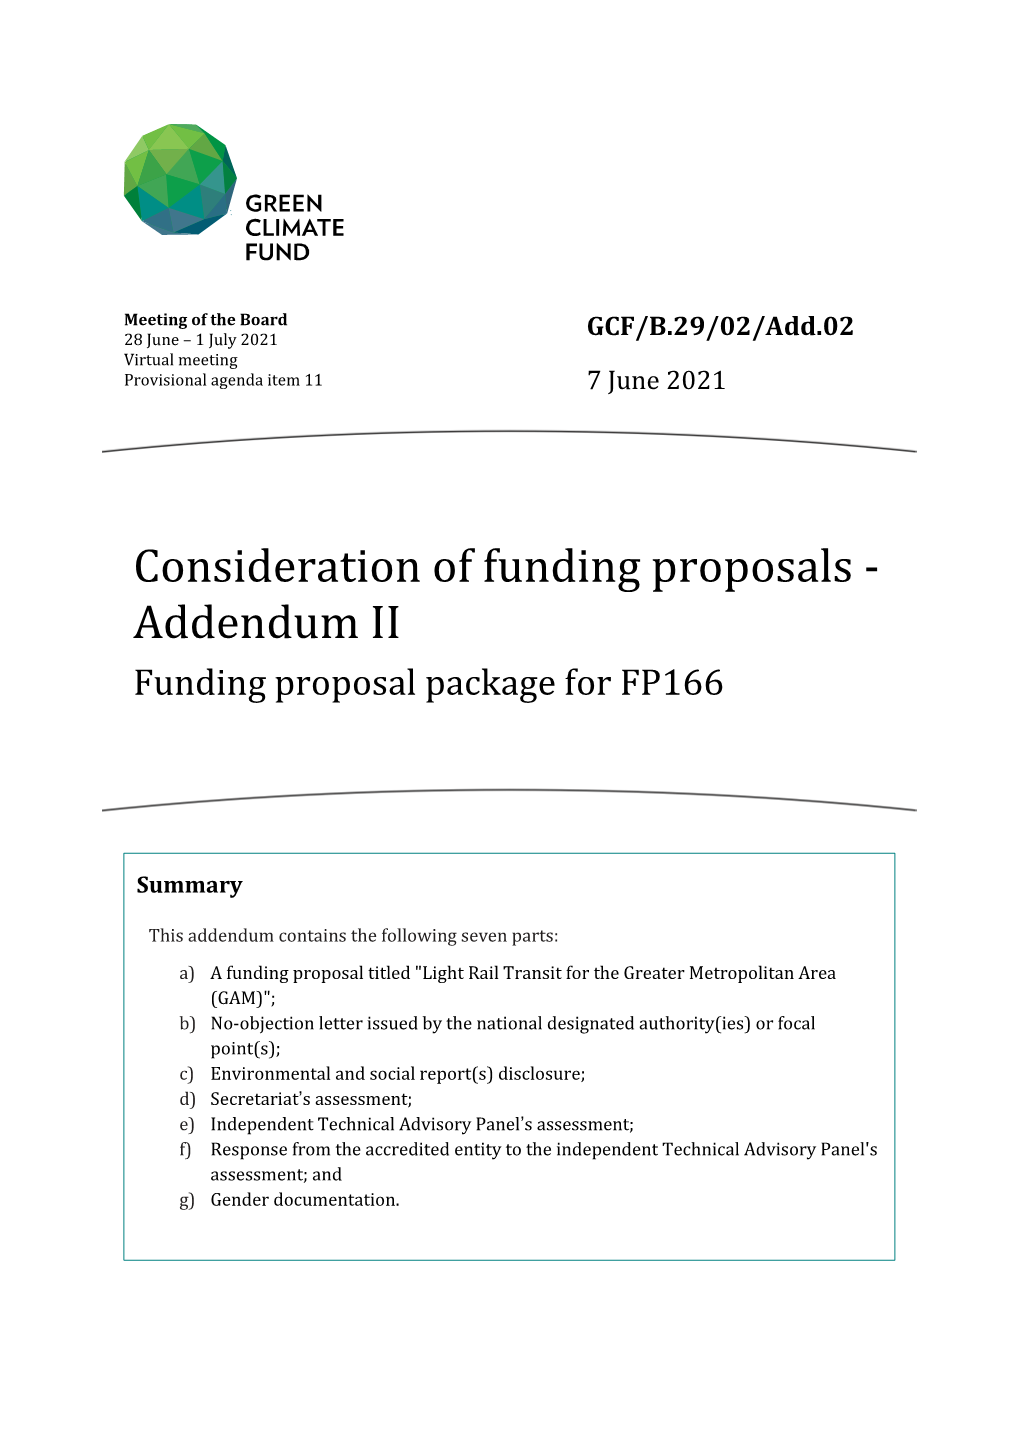 Consideration of Funding Proposals - Addendum II Funding Proposal Package for FP166